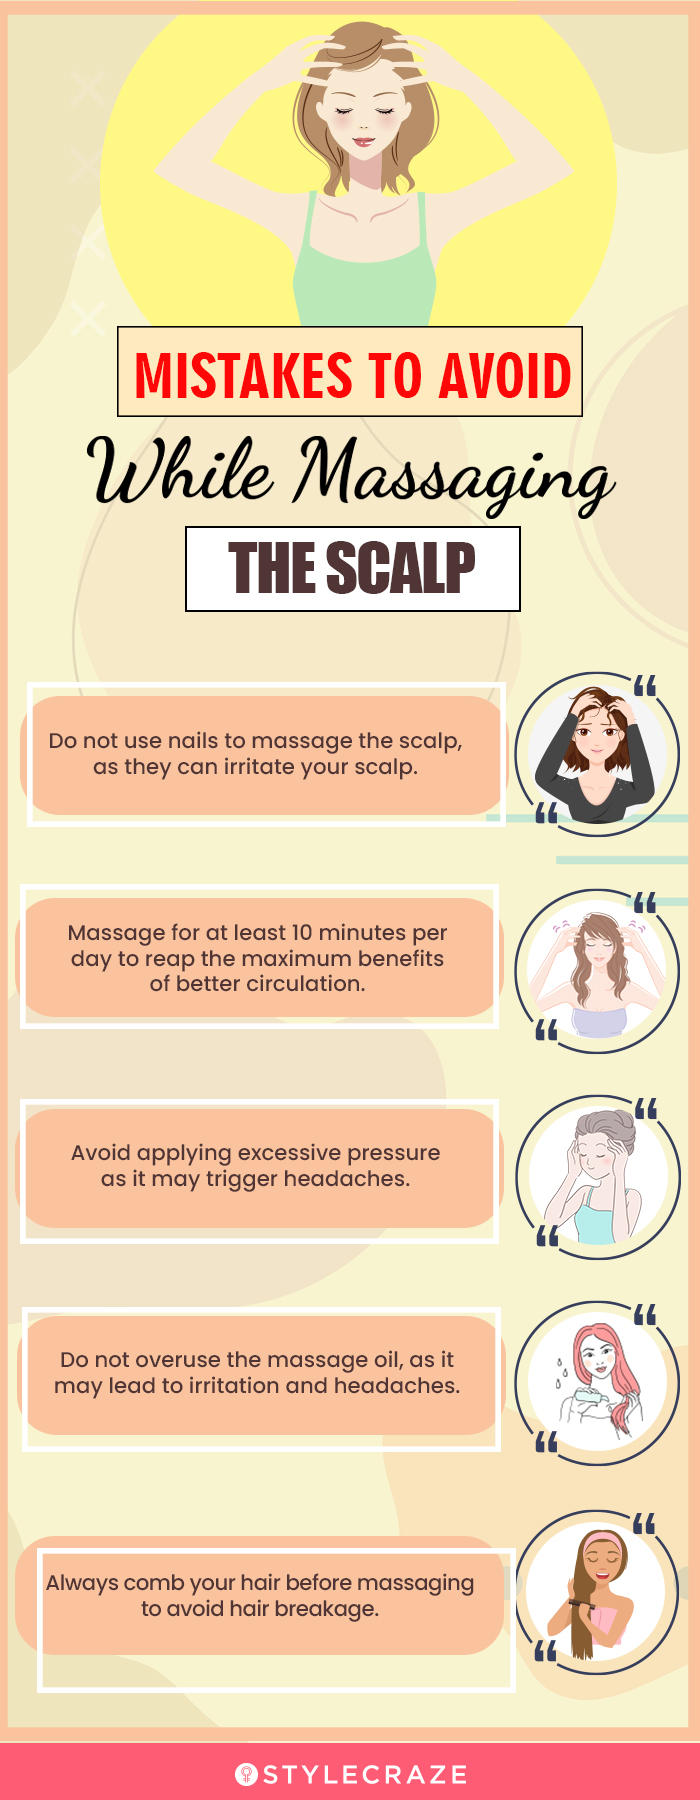 How To Do Scalp Massage For Hair Growth And How Does It Work?